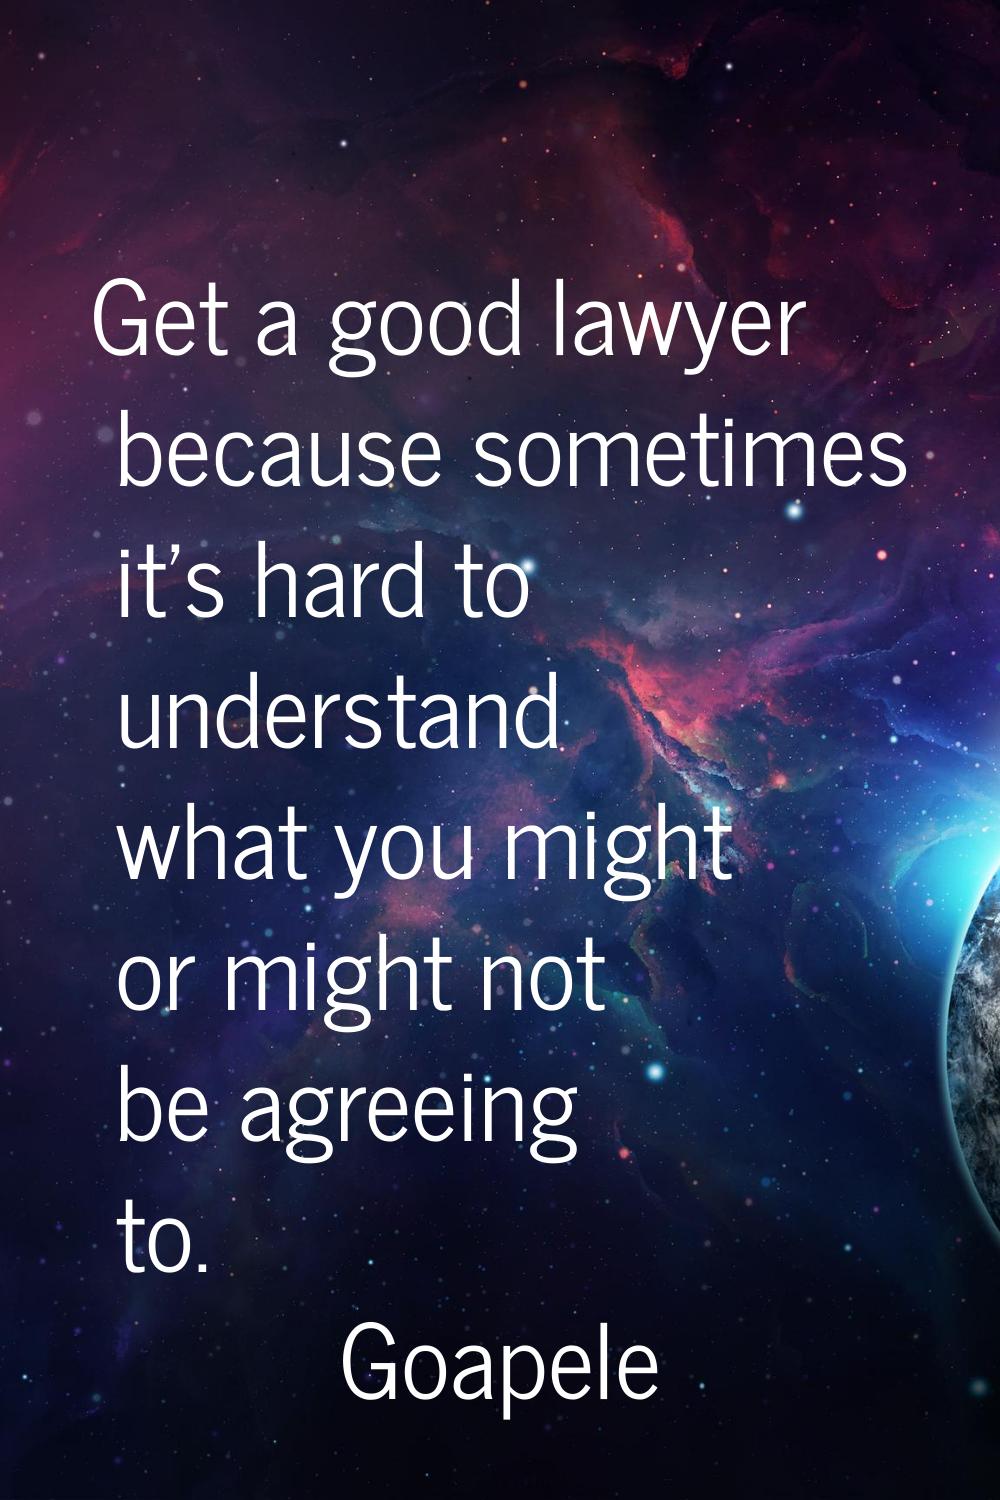 Get a good lawyer because sometimes it's hard to understand what you might or might not be agreeing